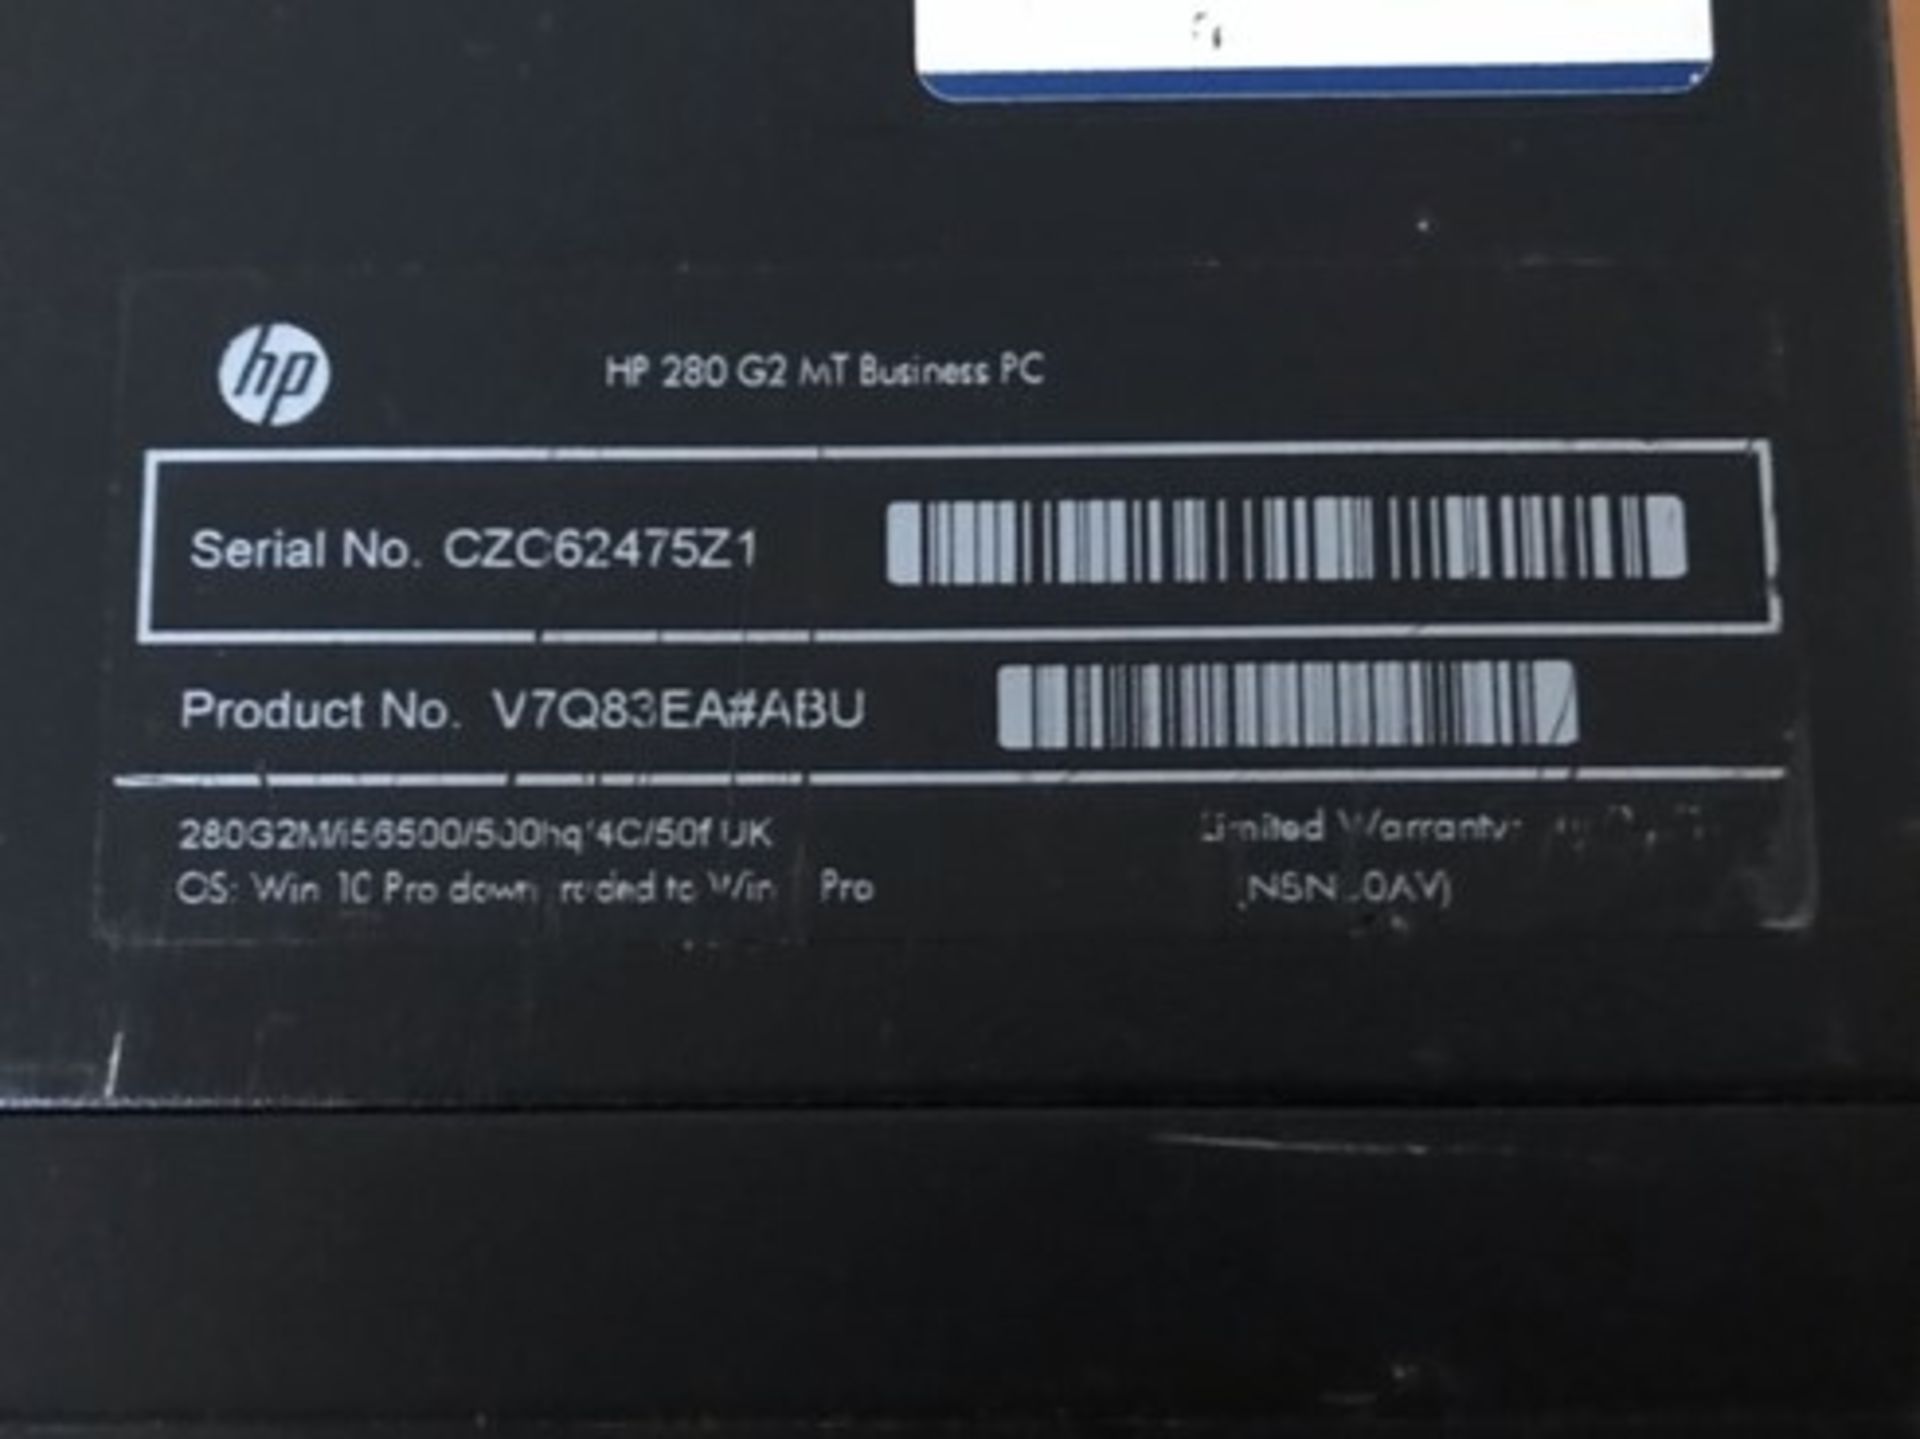 HP 280 G2 MT Business core i5 personal computer - Image 3 of 3